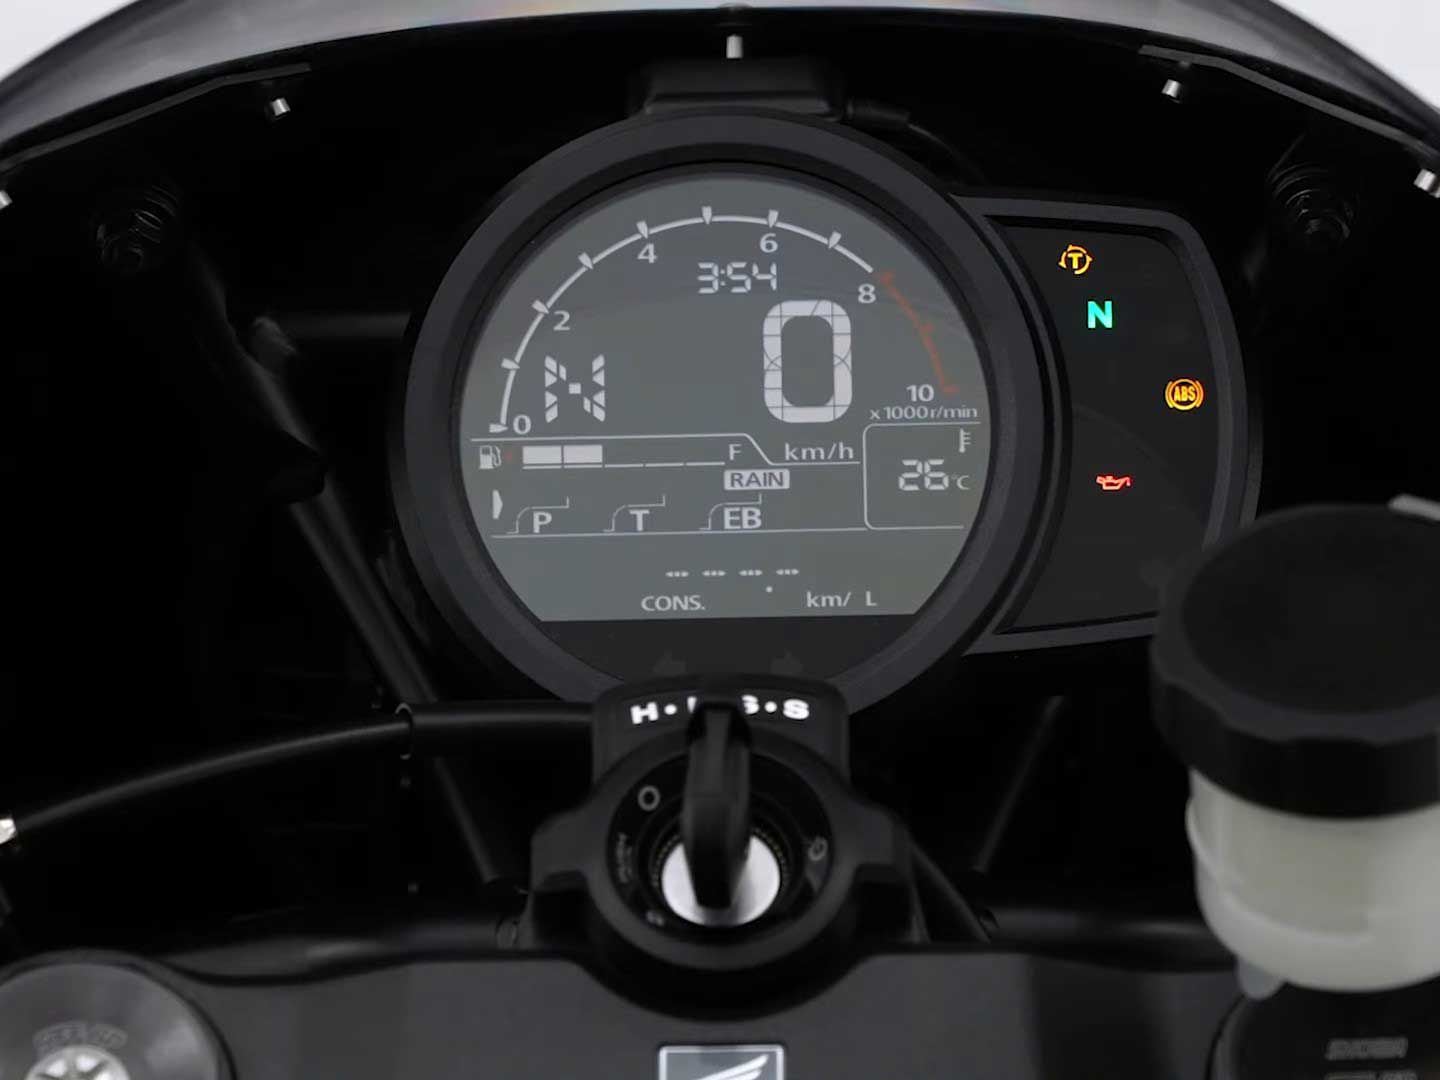 Although there’s ride-by-wire with multiple riding modes, the Hawk has a relatively uncluttered dash punctuated by a simple round gauge rather than a massive TFT screen.